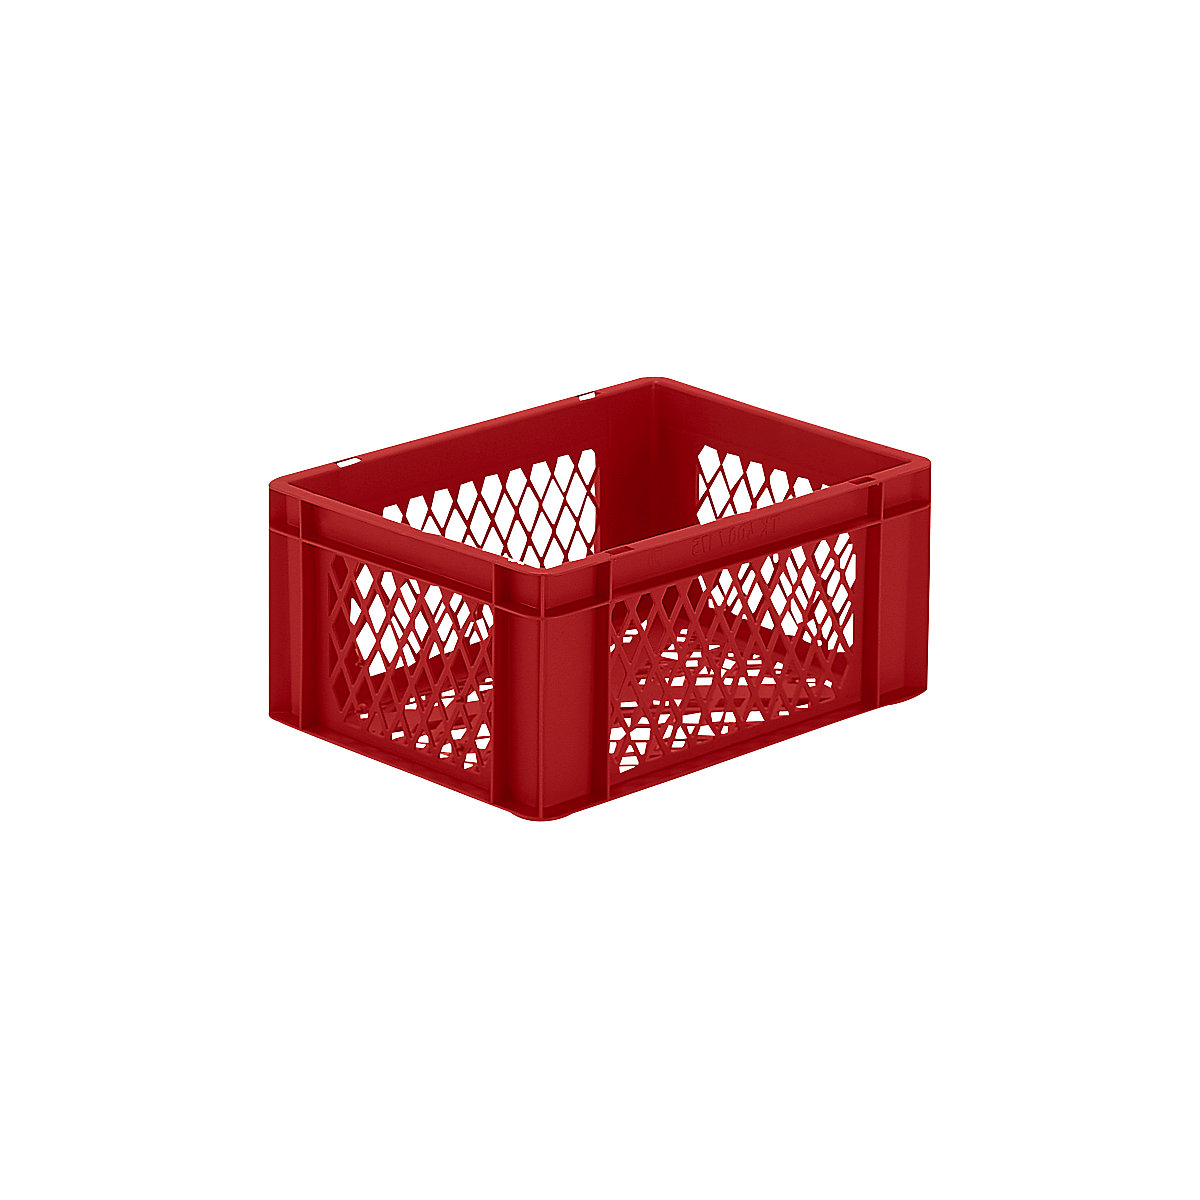 Euro stacking container, perforated walls and base, LxWxH 400 x 300 x 175 mm, red, pack of 5-7